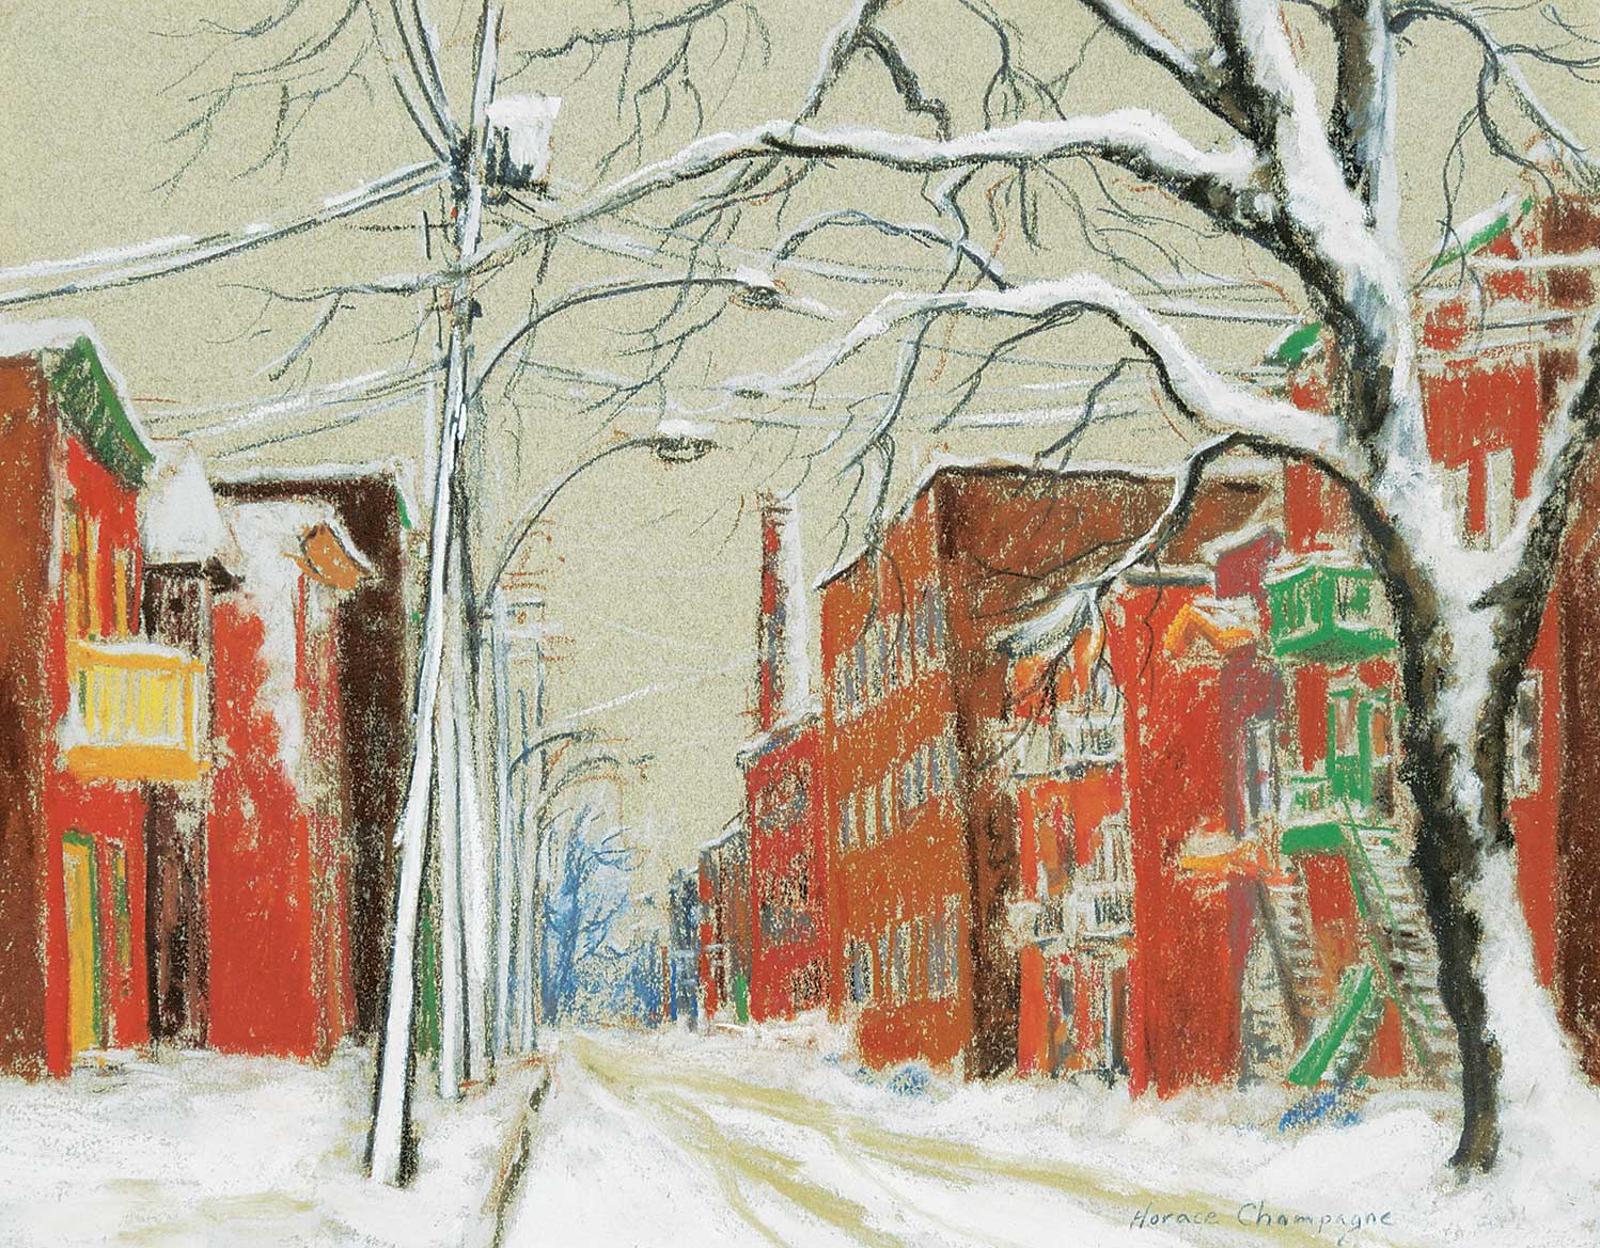 Horace Champagne (1937) - First Snow-Storm Rivard Street, Montreal